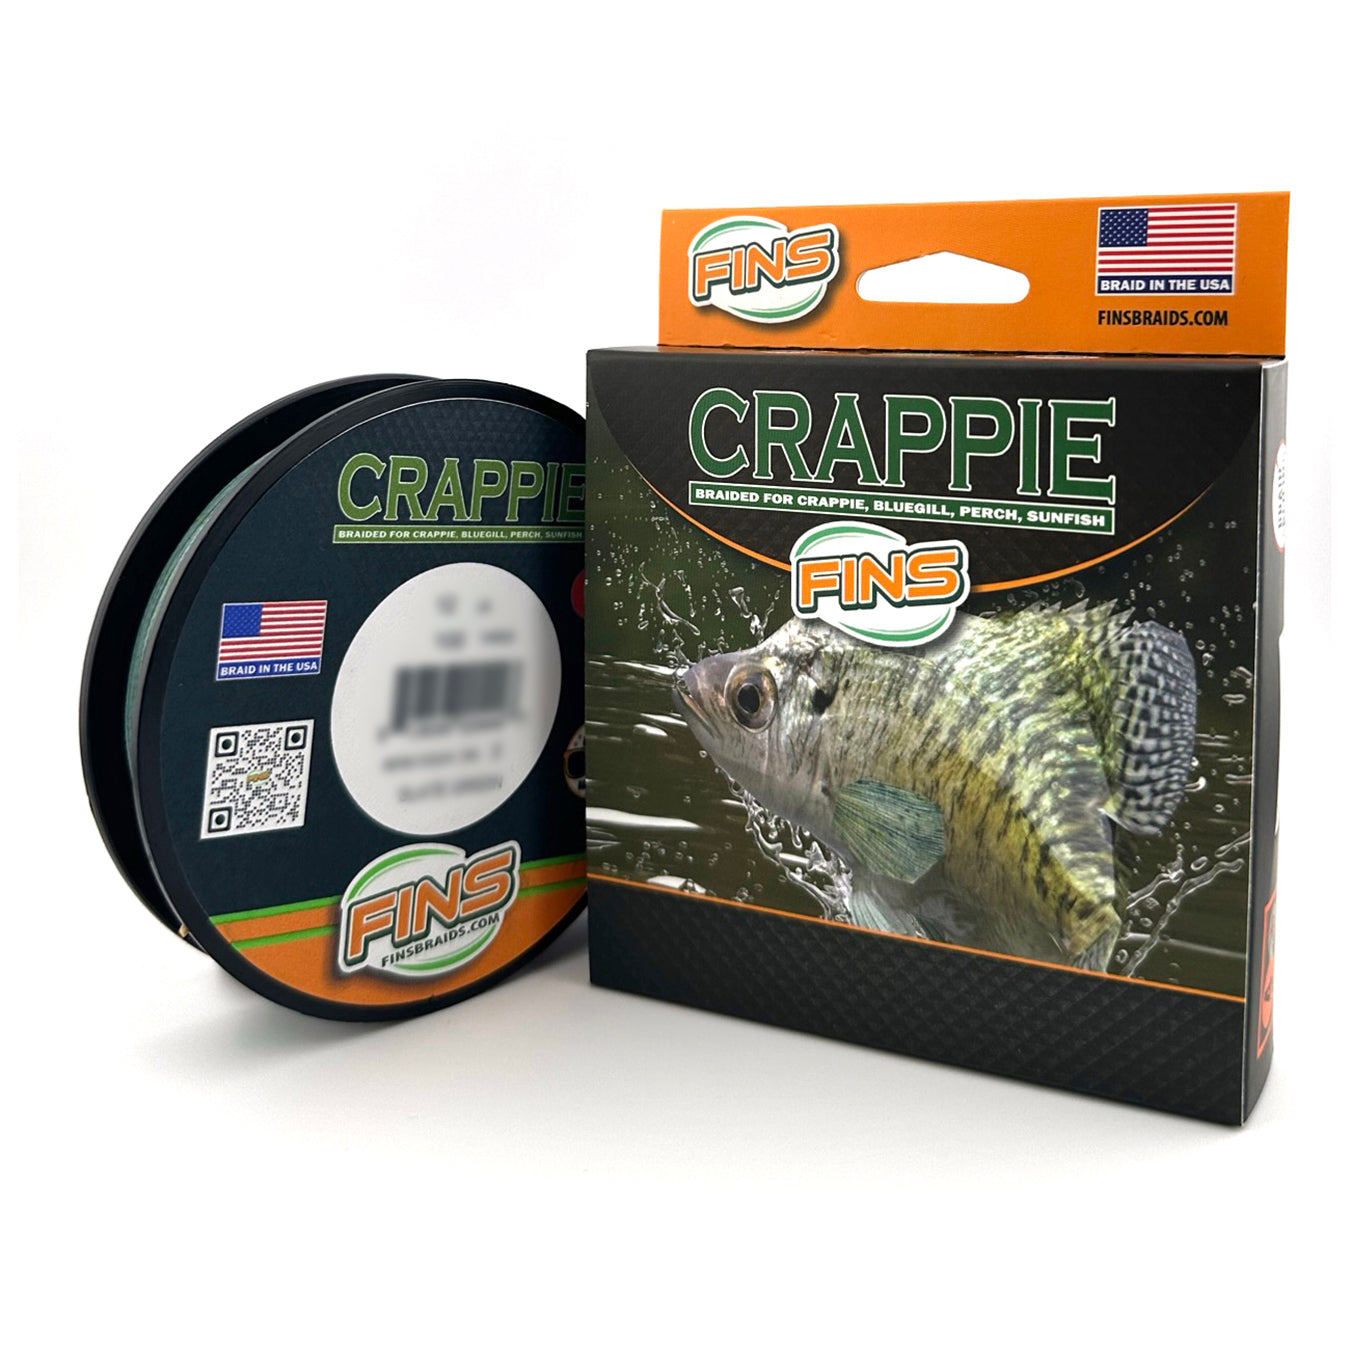 Green Spool and box Crappie Braid ultralight diameter, braided for fishing line for crappie, bluegill, perch, sunfish.